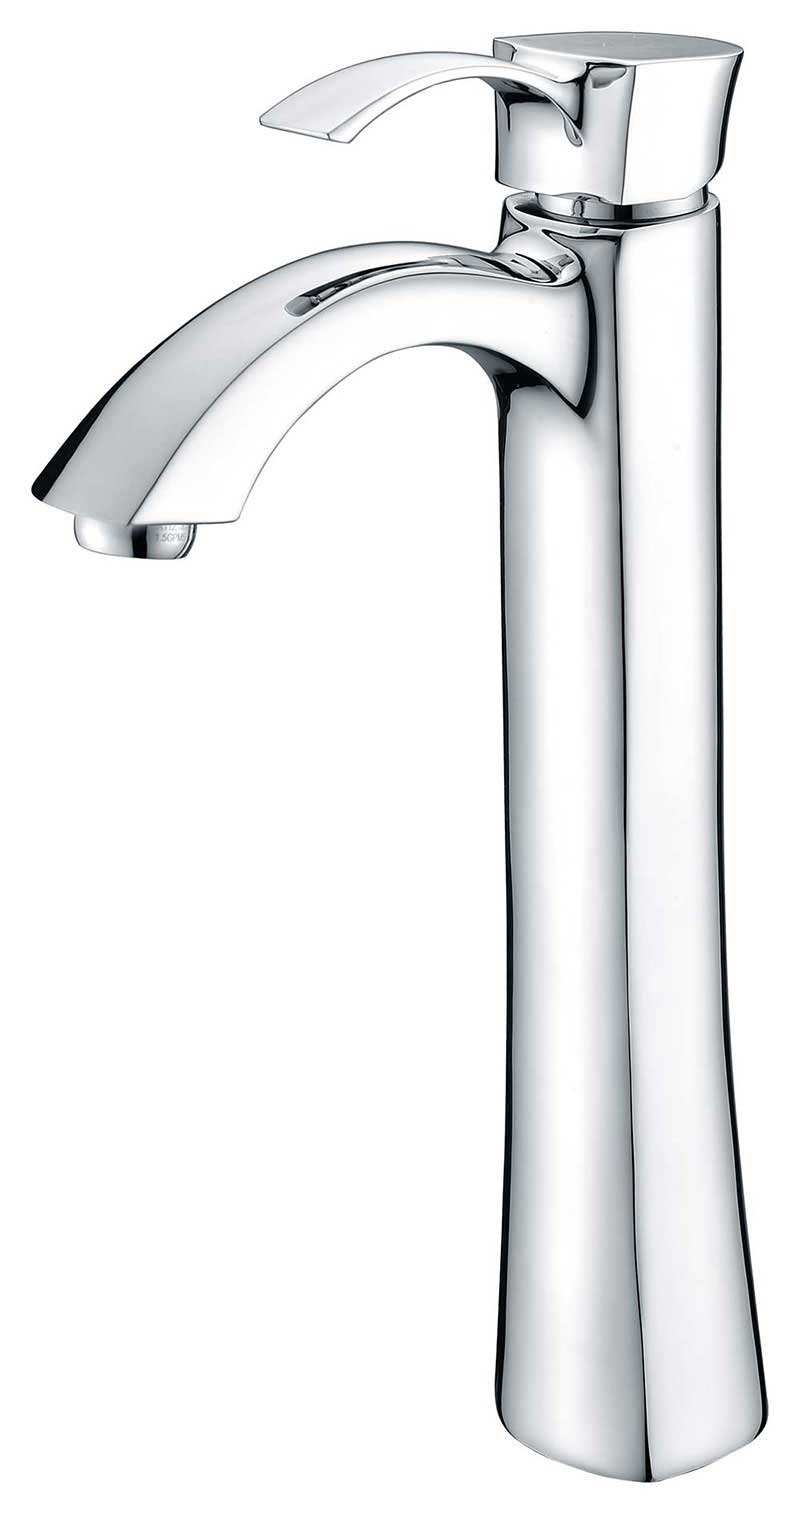 Anzzi Spirito Series Deco-Glass Vessel Sink in Churning Silver with Harmony Faucet in Chrome 3